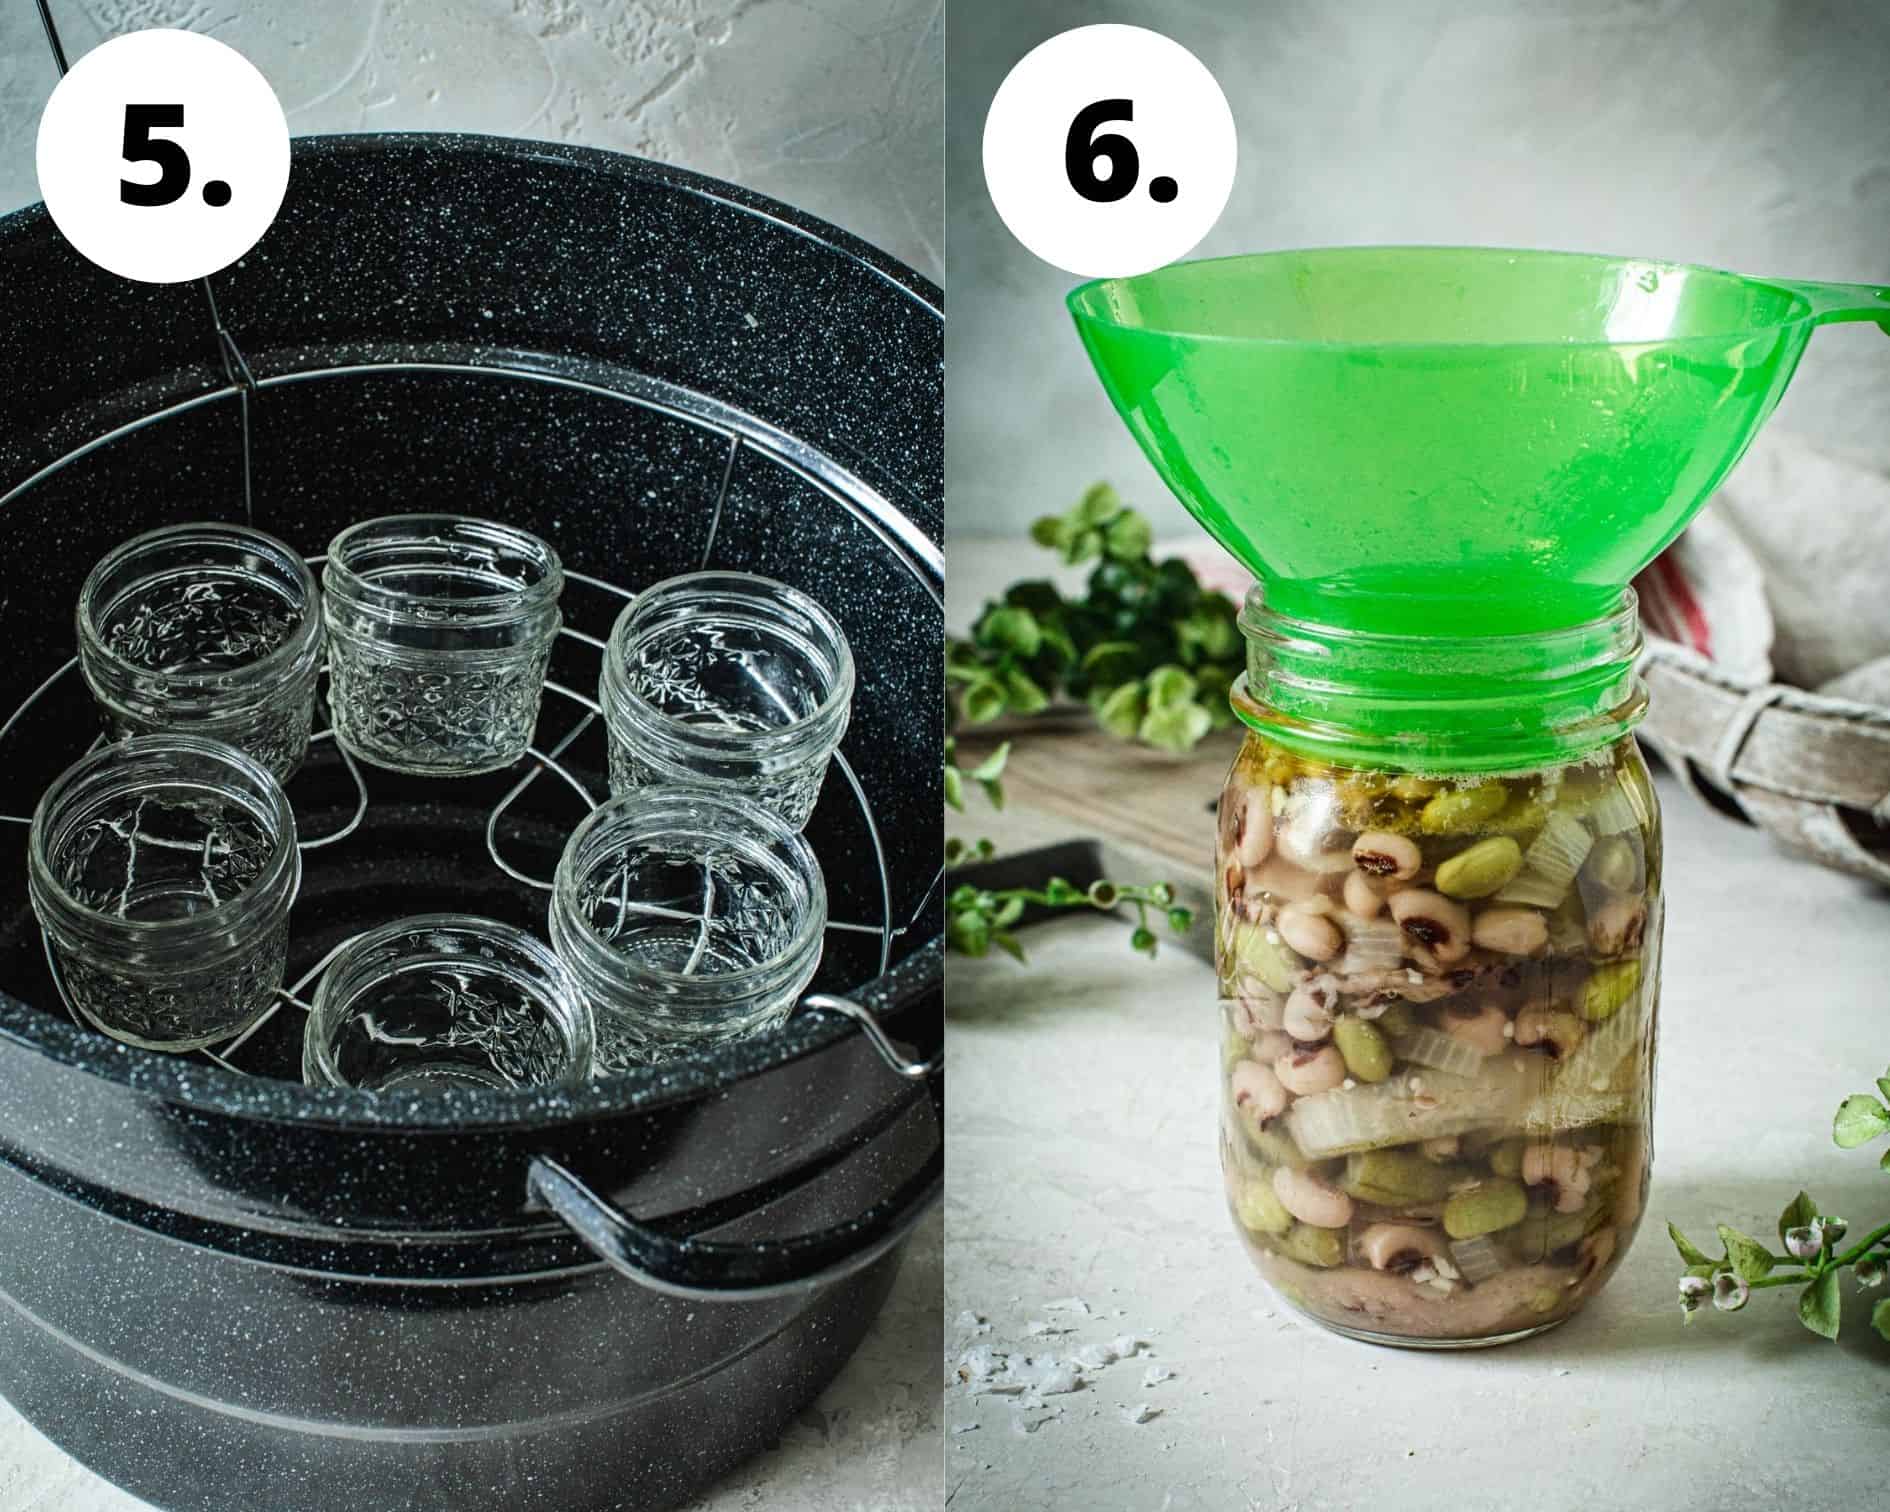 Bean salad process steps for canning steps 5 and 6.